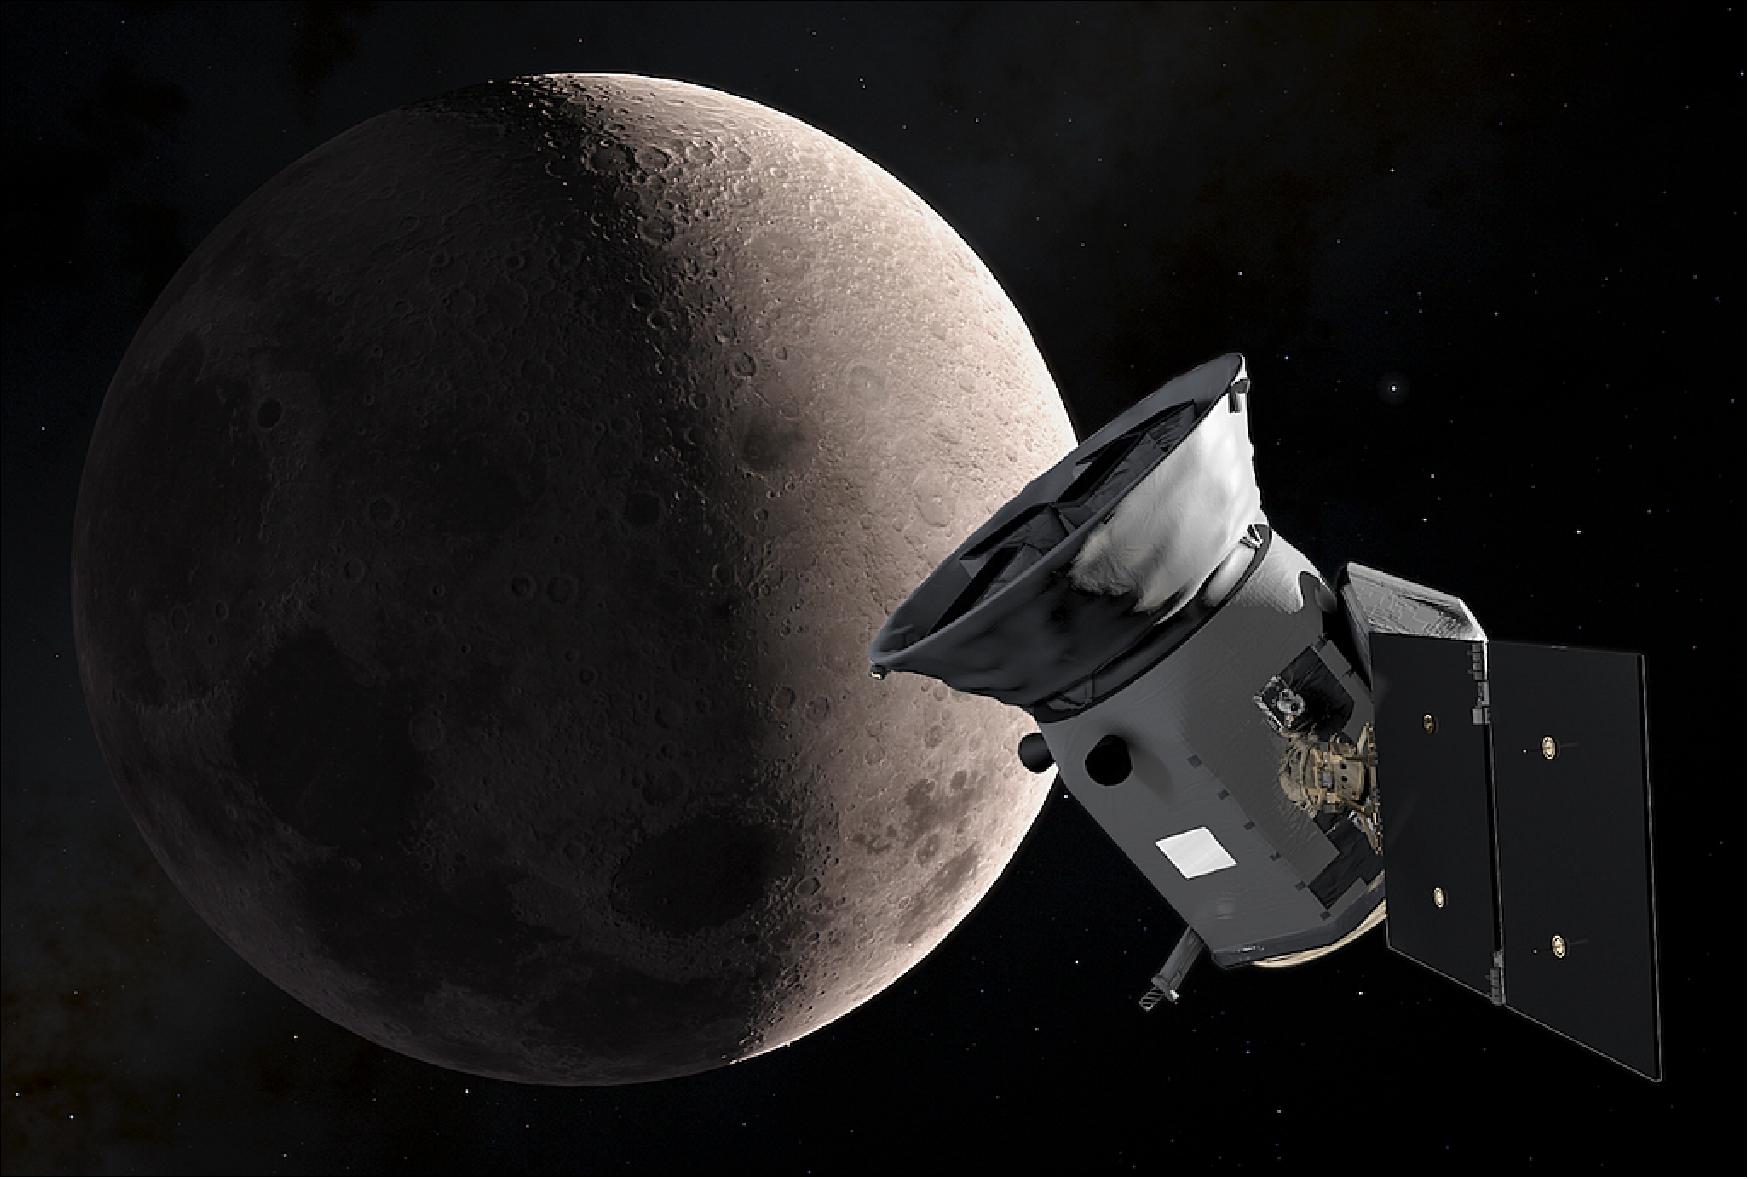 Figure 64: An artist’s illustration of TESS as it passed the Moon during its lunar flyby. This provided a gravitational boost that placed TESS on course for its final working orbit (image credit: NASA's Goddard Space Flight Center)